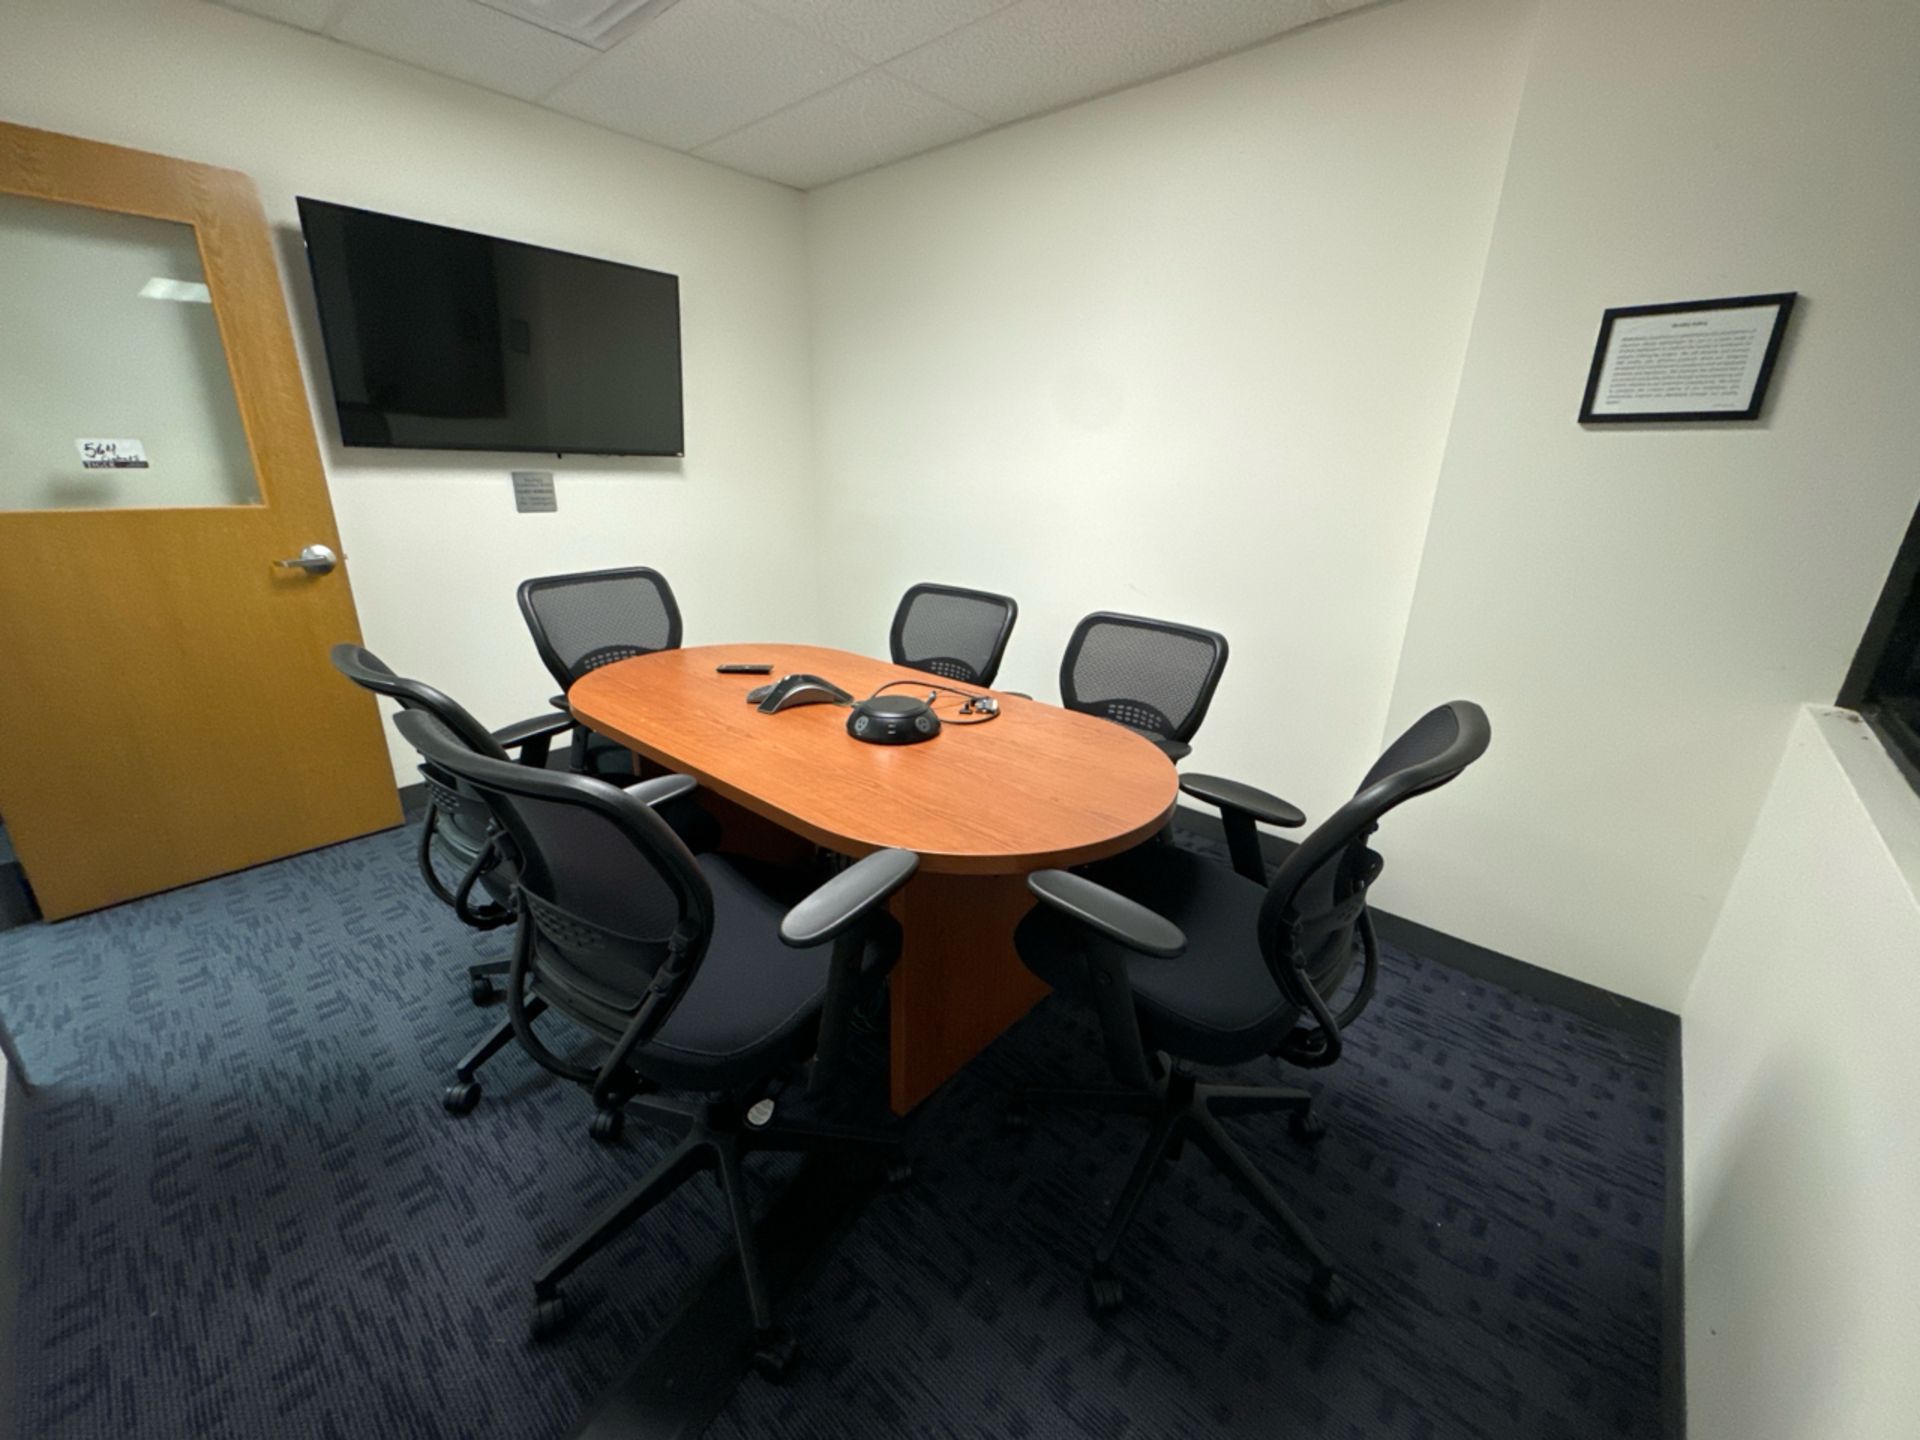 Contents of Conference Room